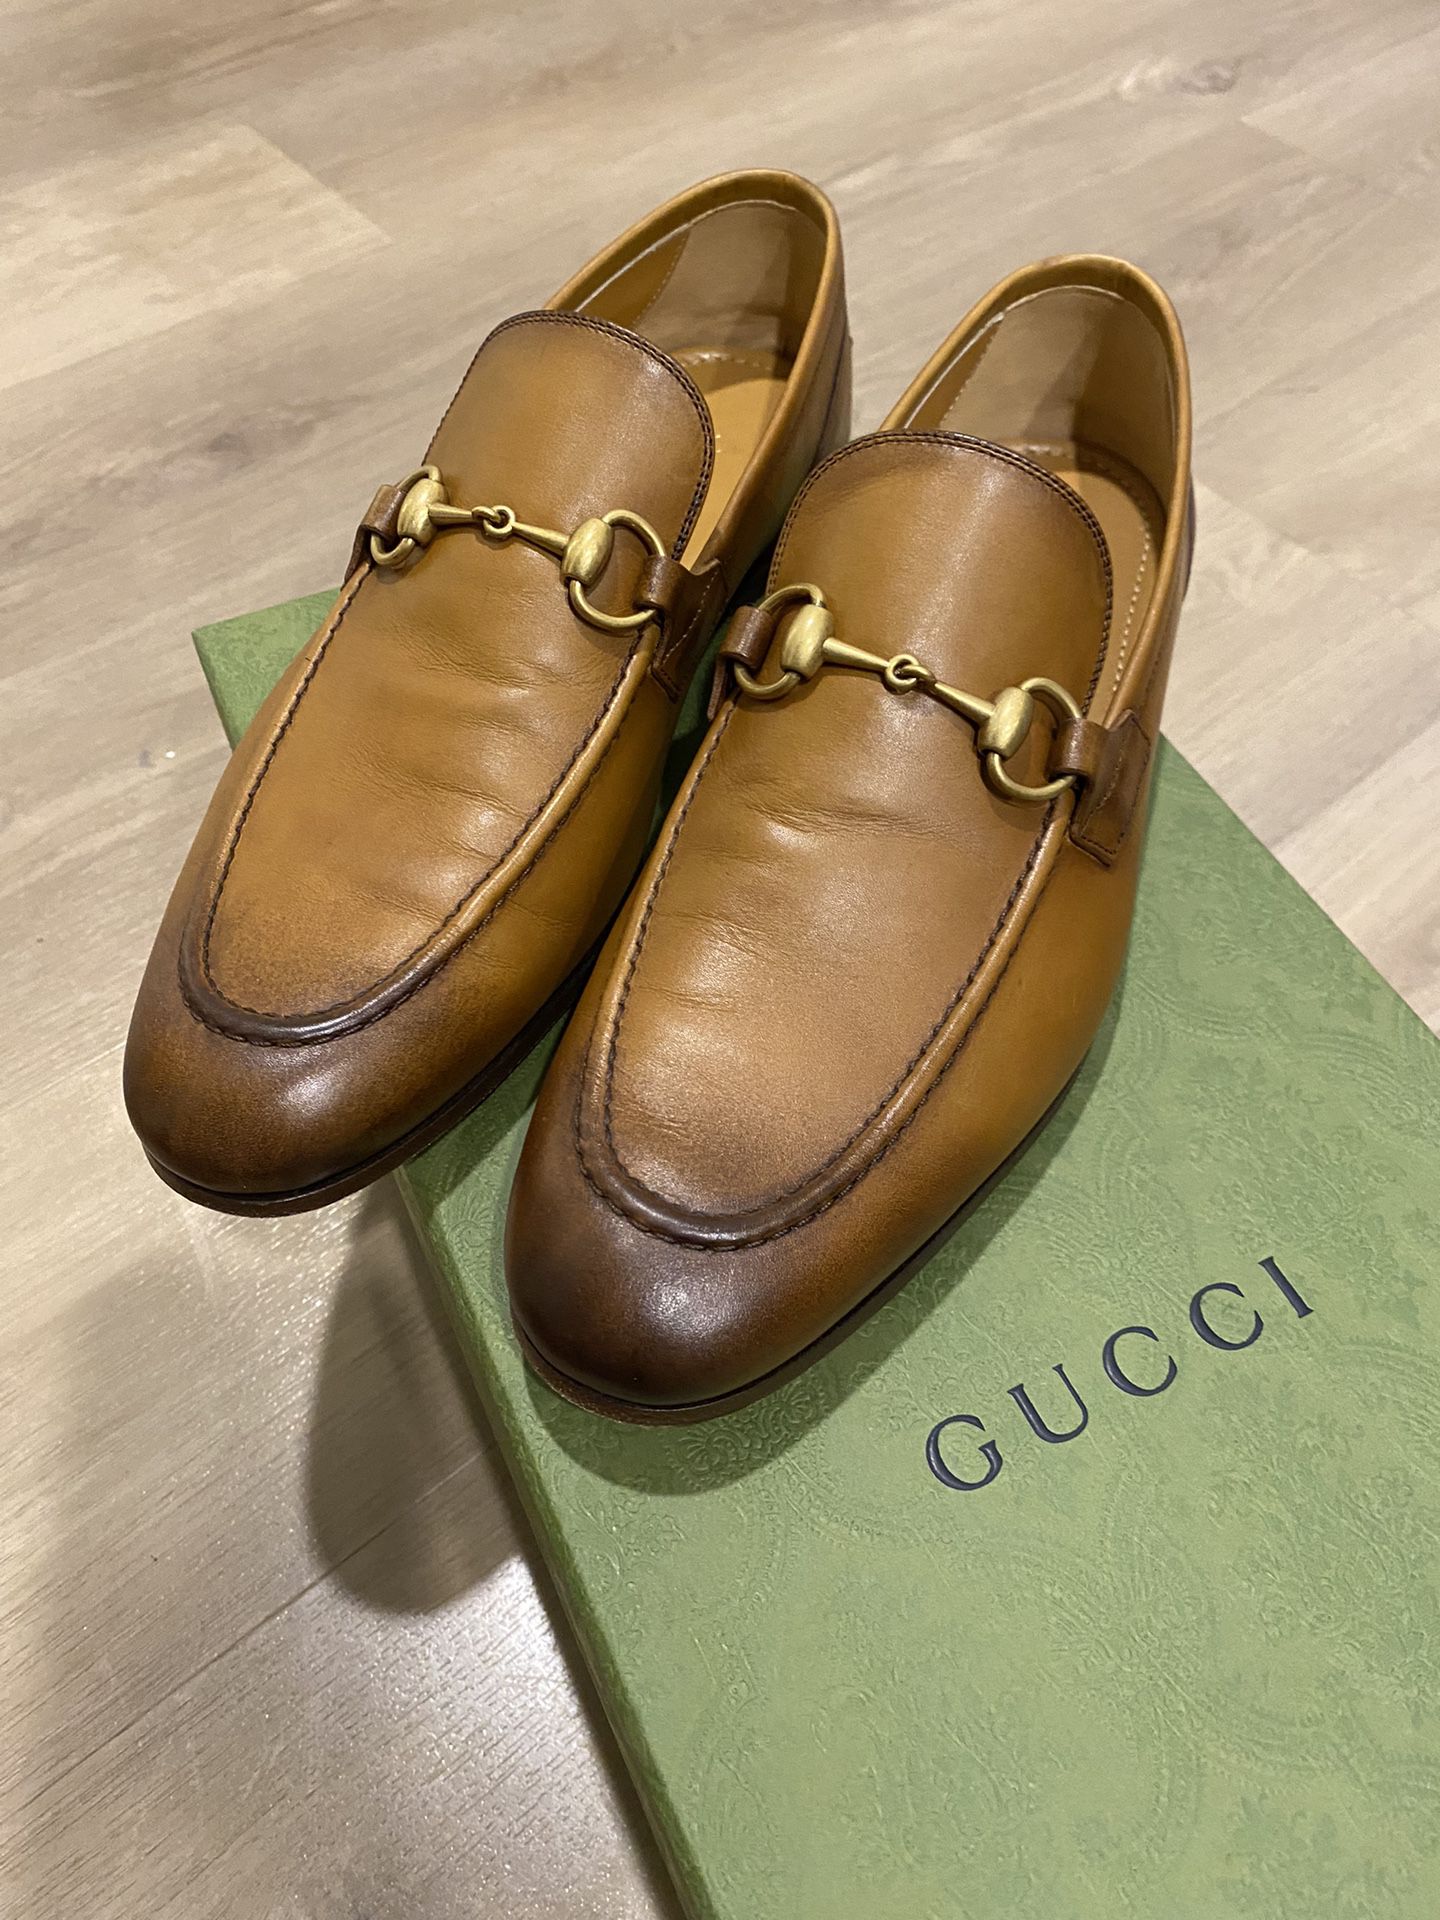 Gucci Jordan loafers Sale York, NY - OfferUp